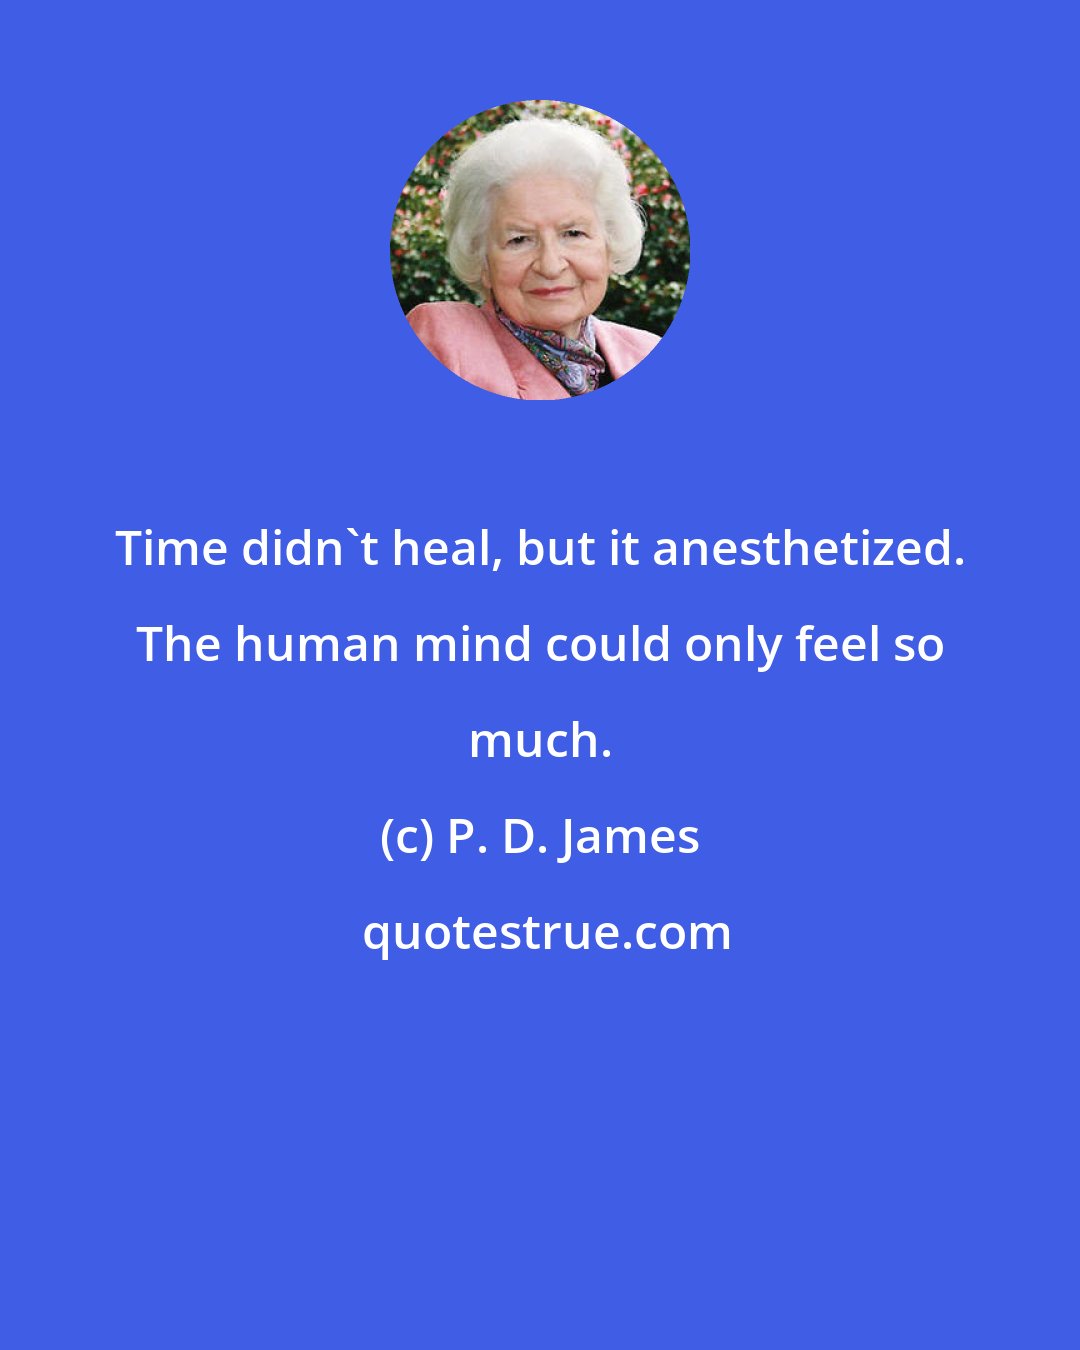 P. D. James: Time didn't heal, but it anesthetized. The human mind could only feel so much.